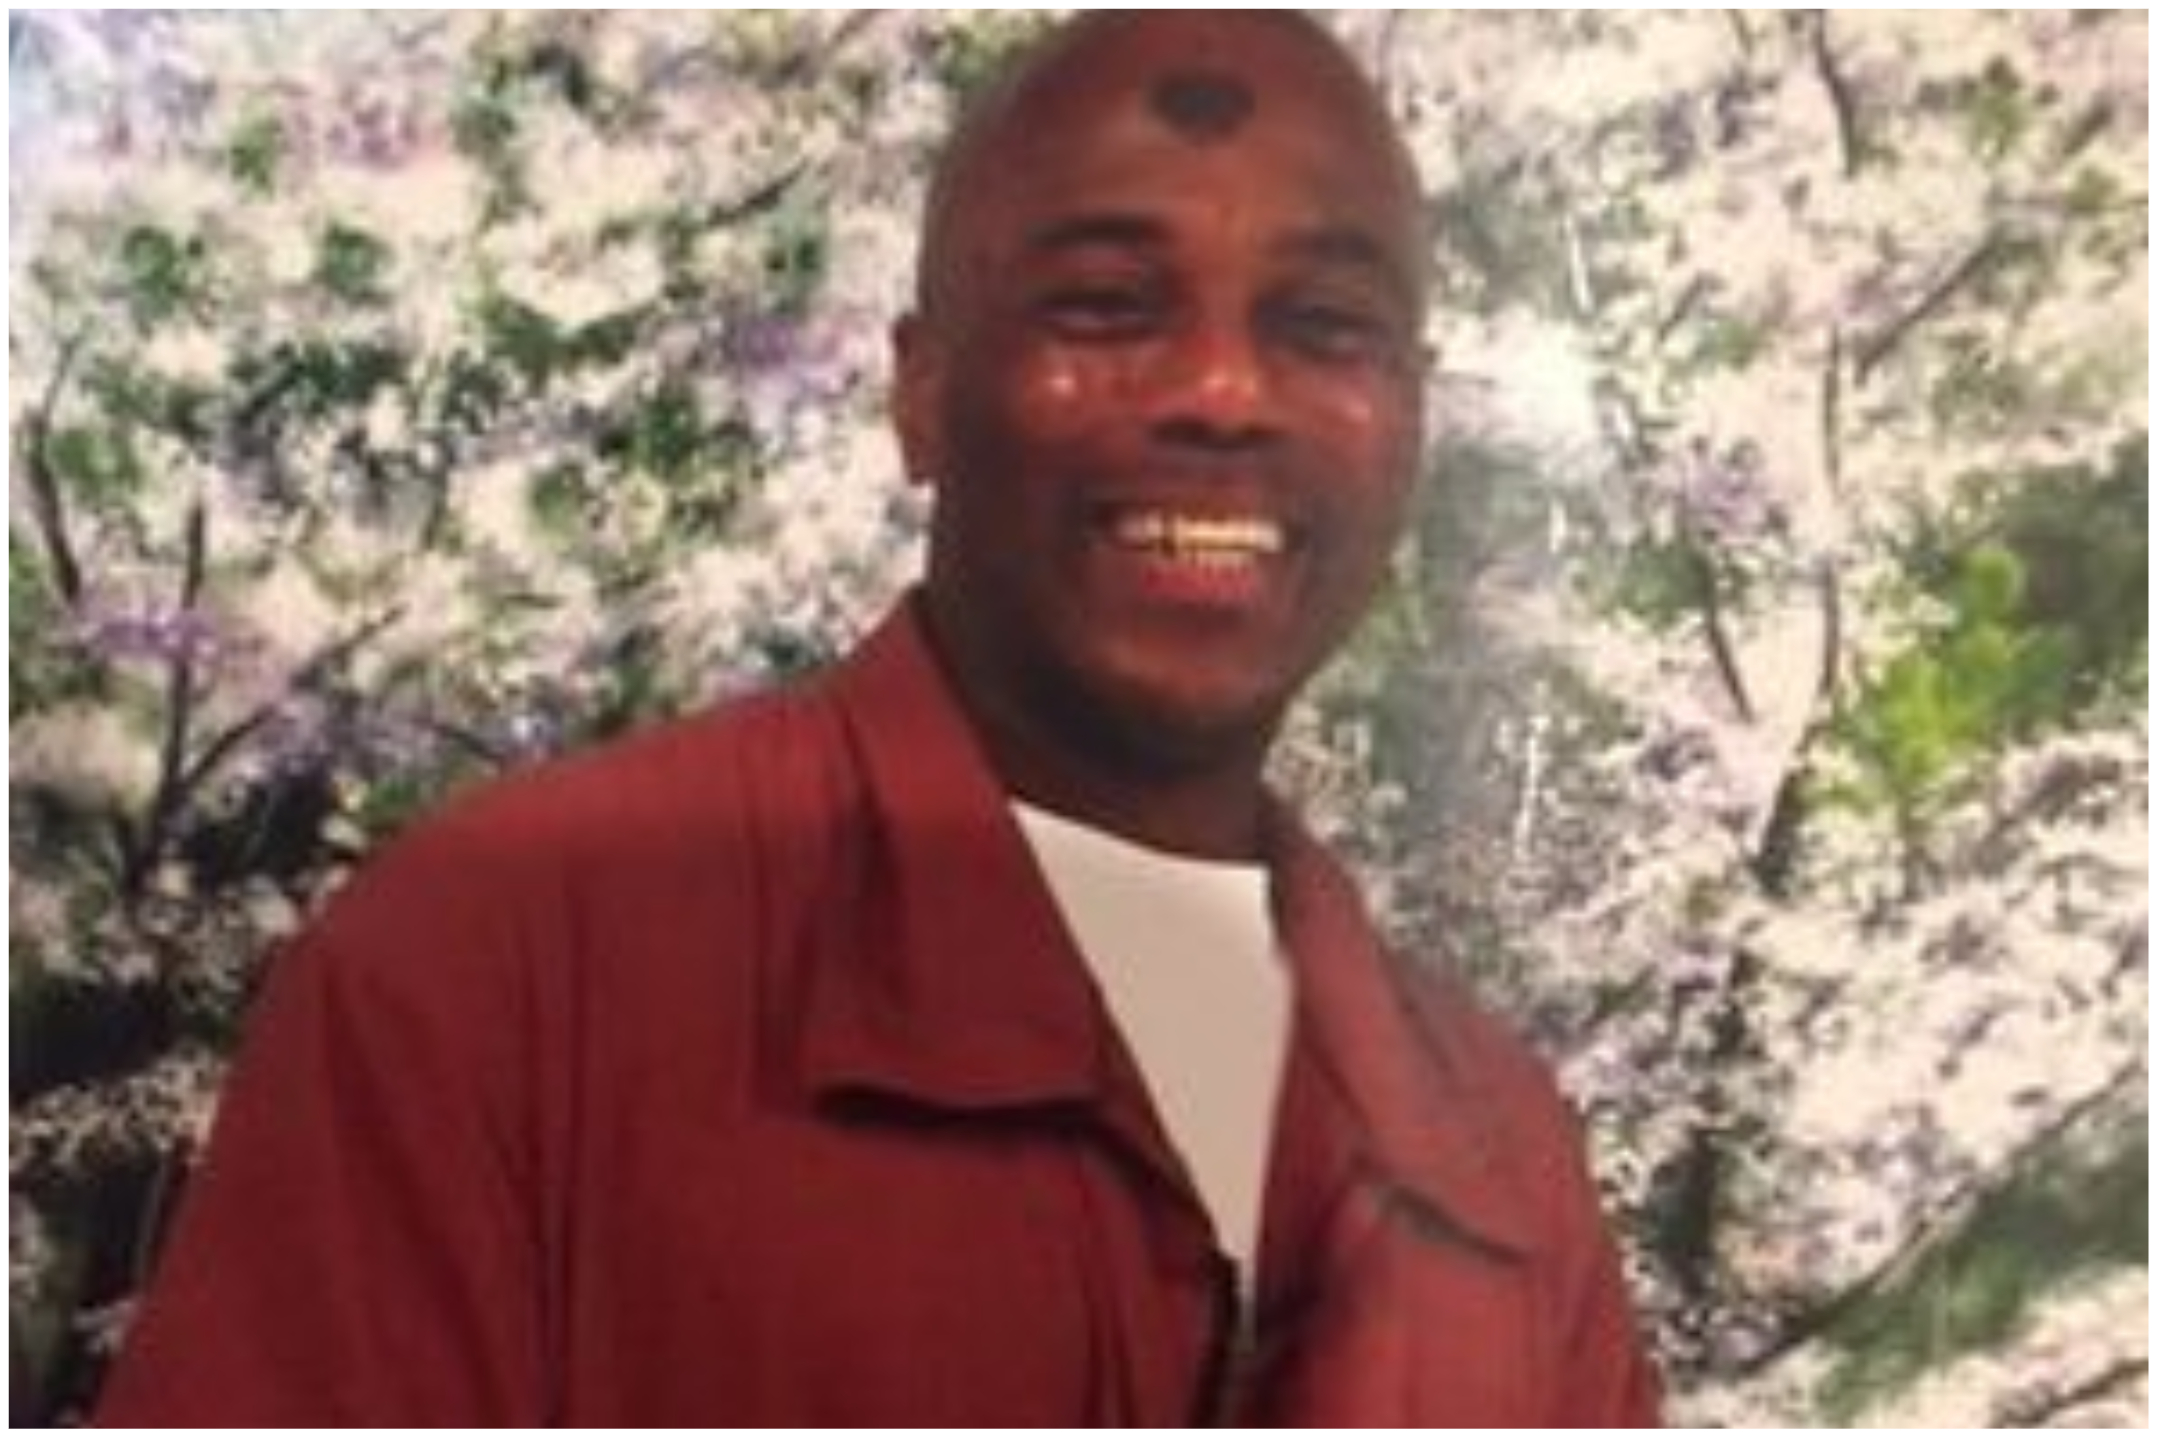 Man on Death Row for 25 Years Shot Dead at Funeral After Being Freed Cops